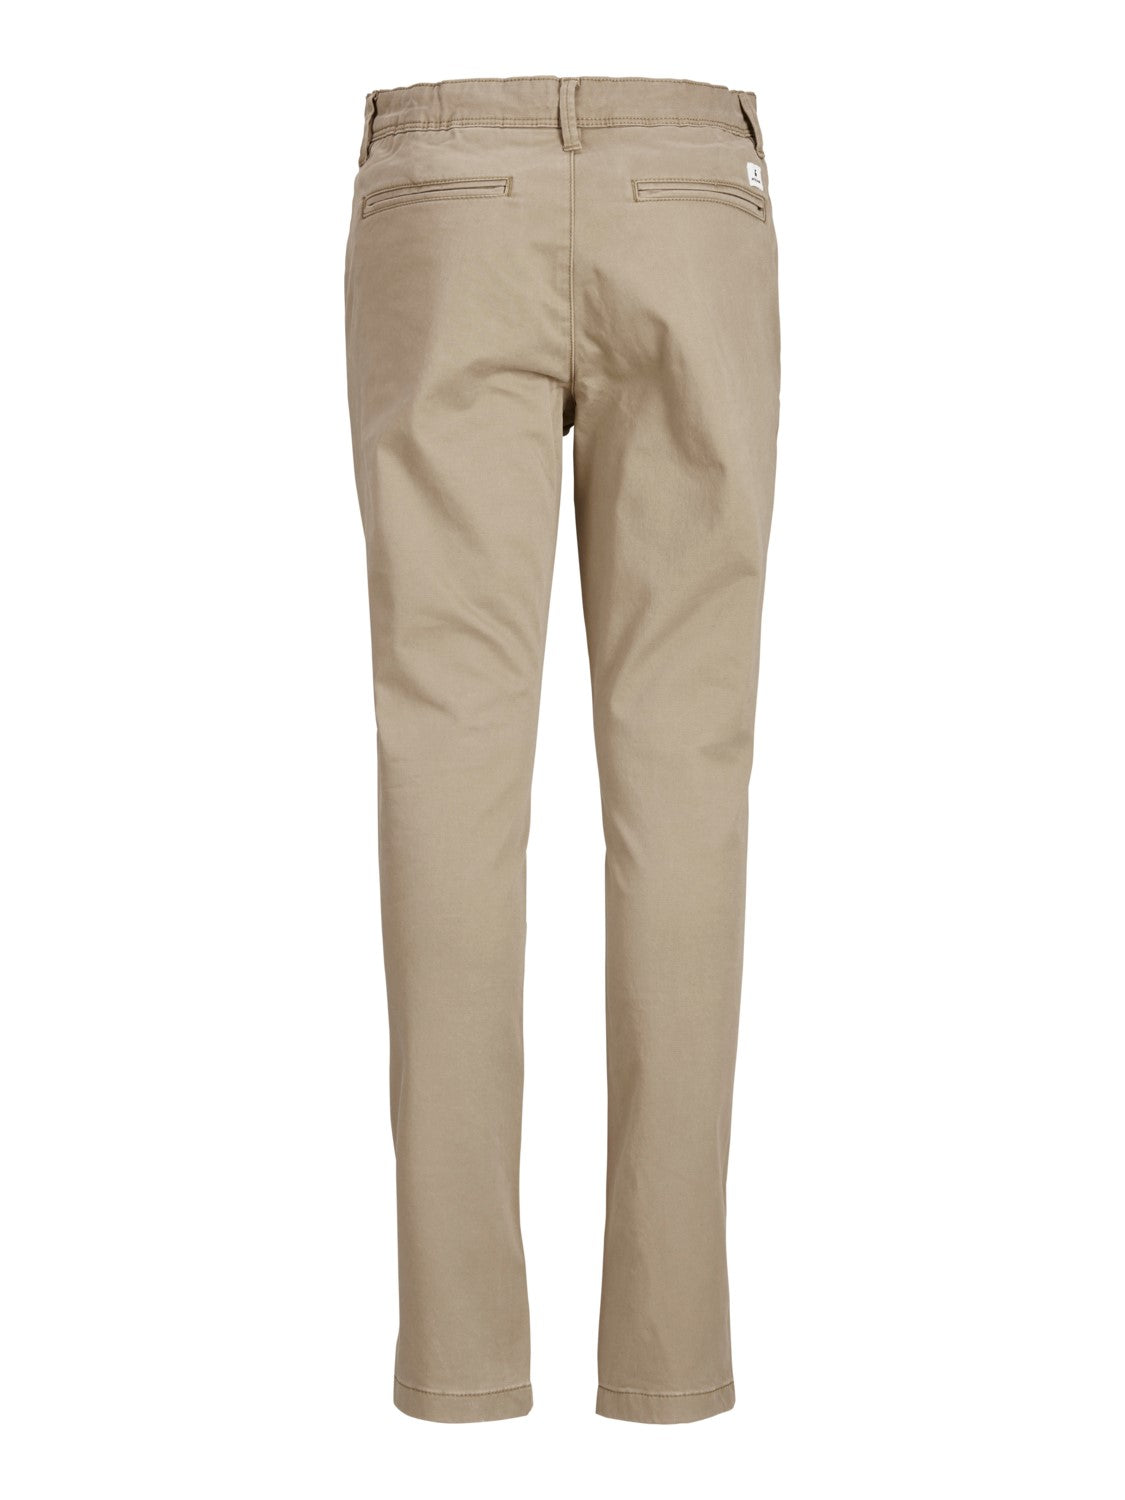 Marco Bowie Junior Chino - Spirit Clothing